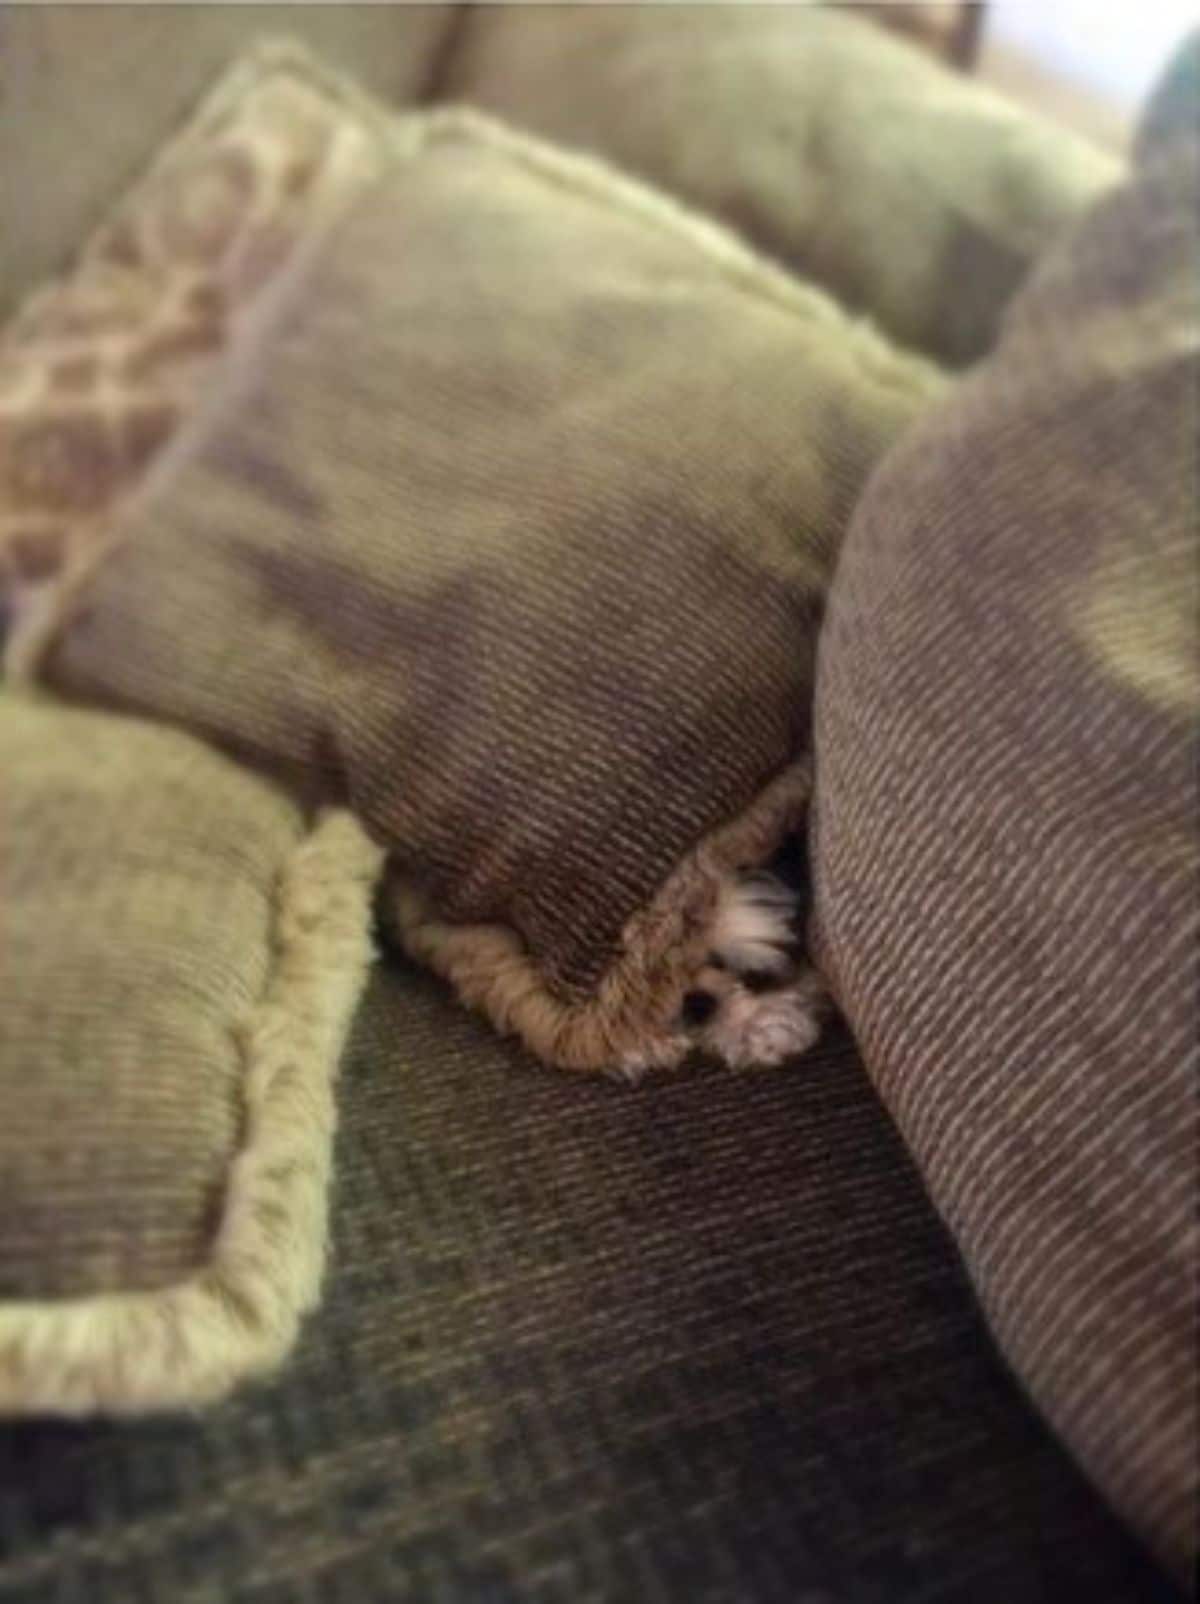 fluffy brown white and black dog peeking out from under a pile of brown pillows on a brown sofa